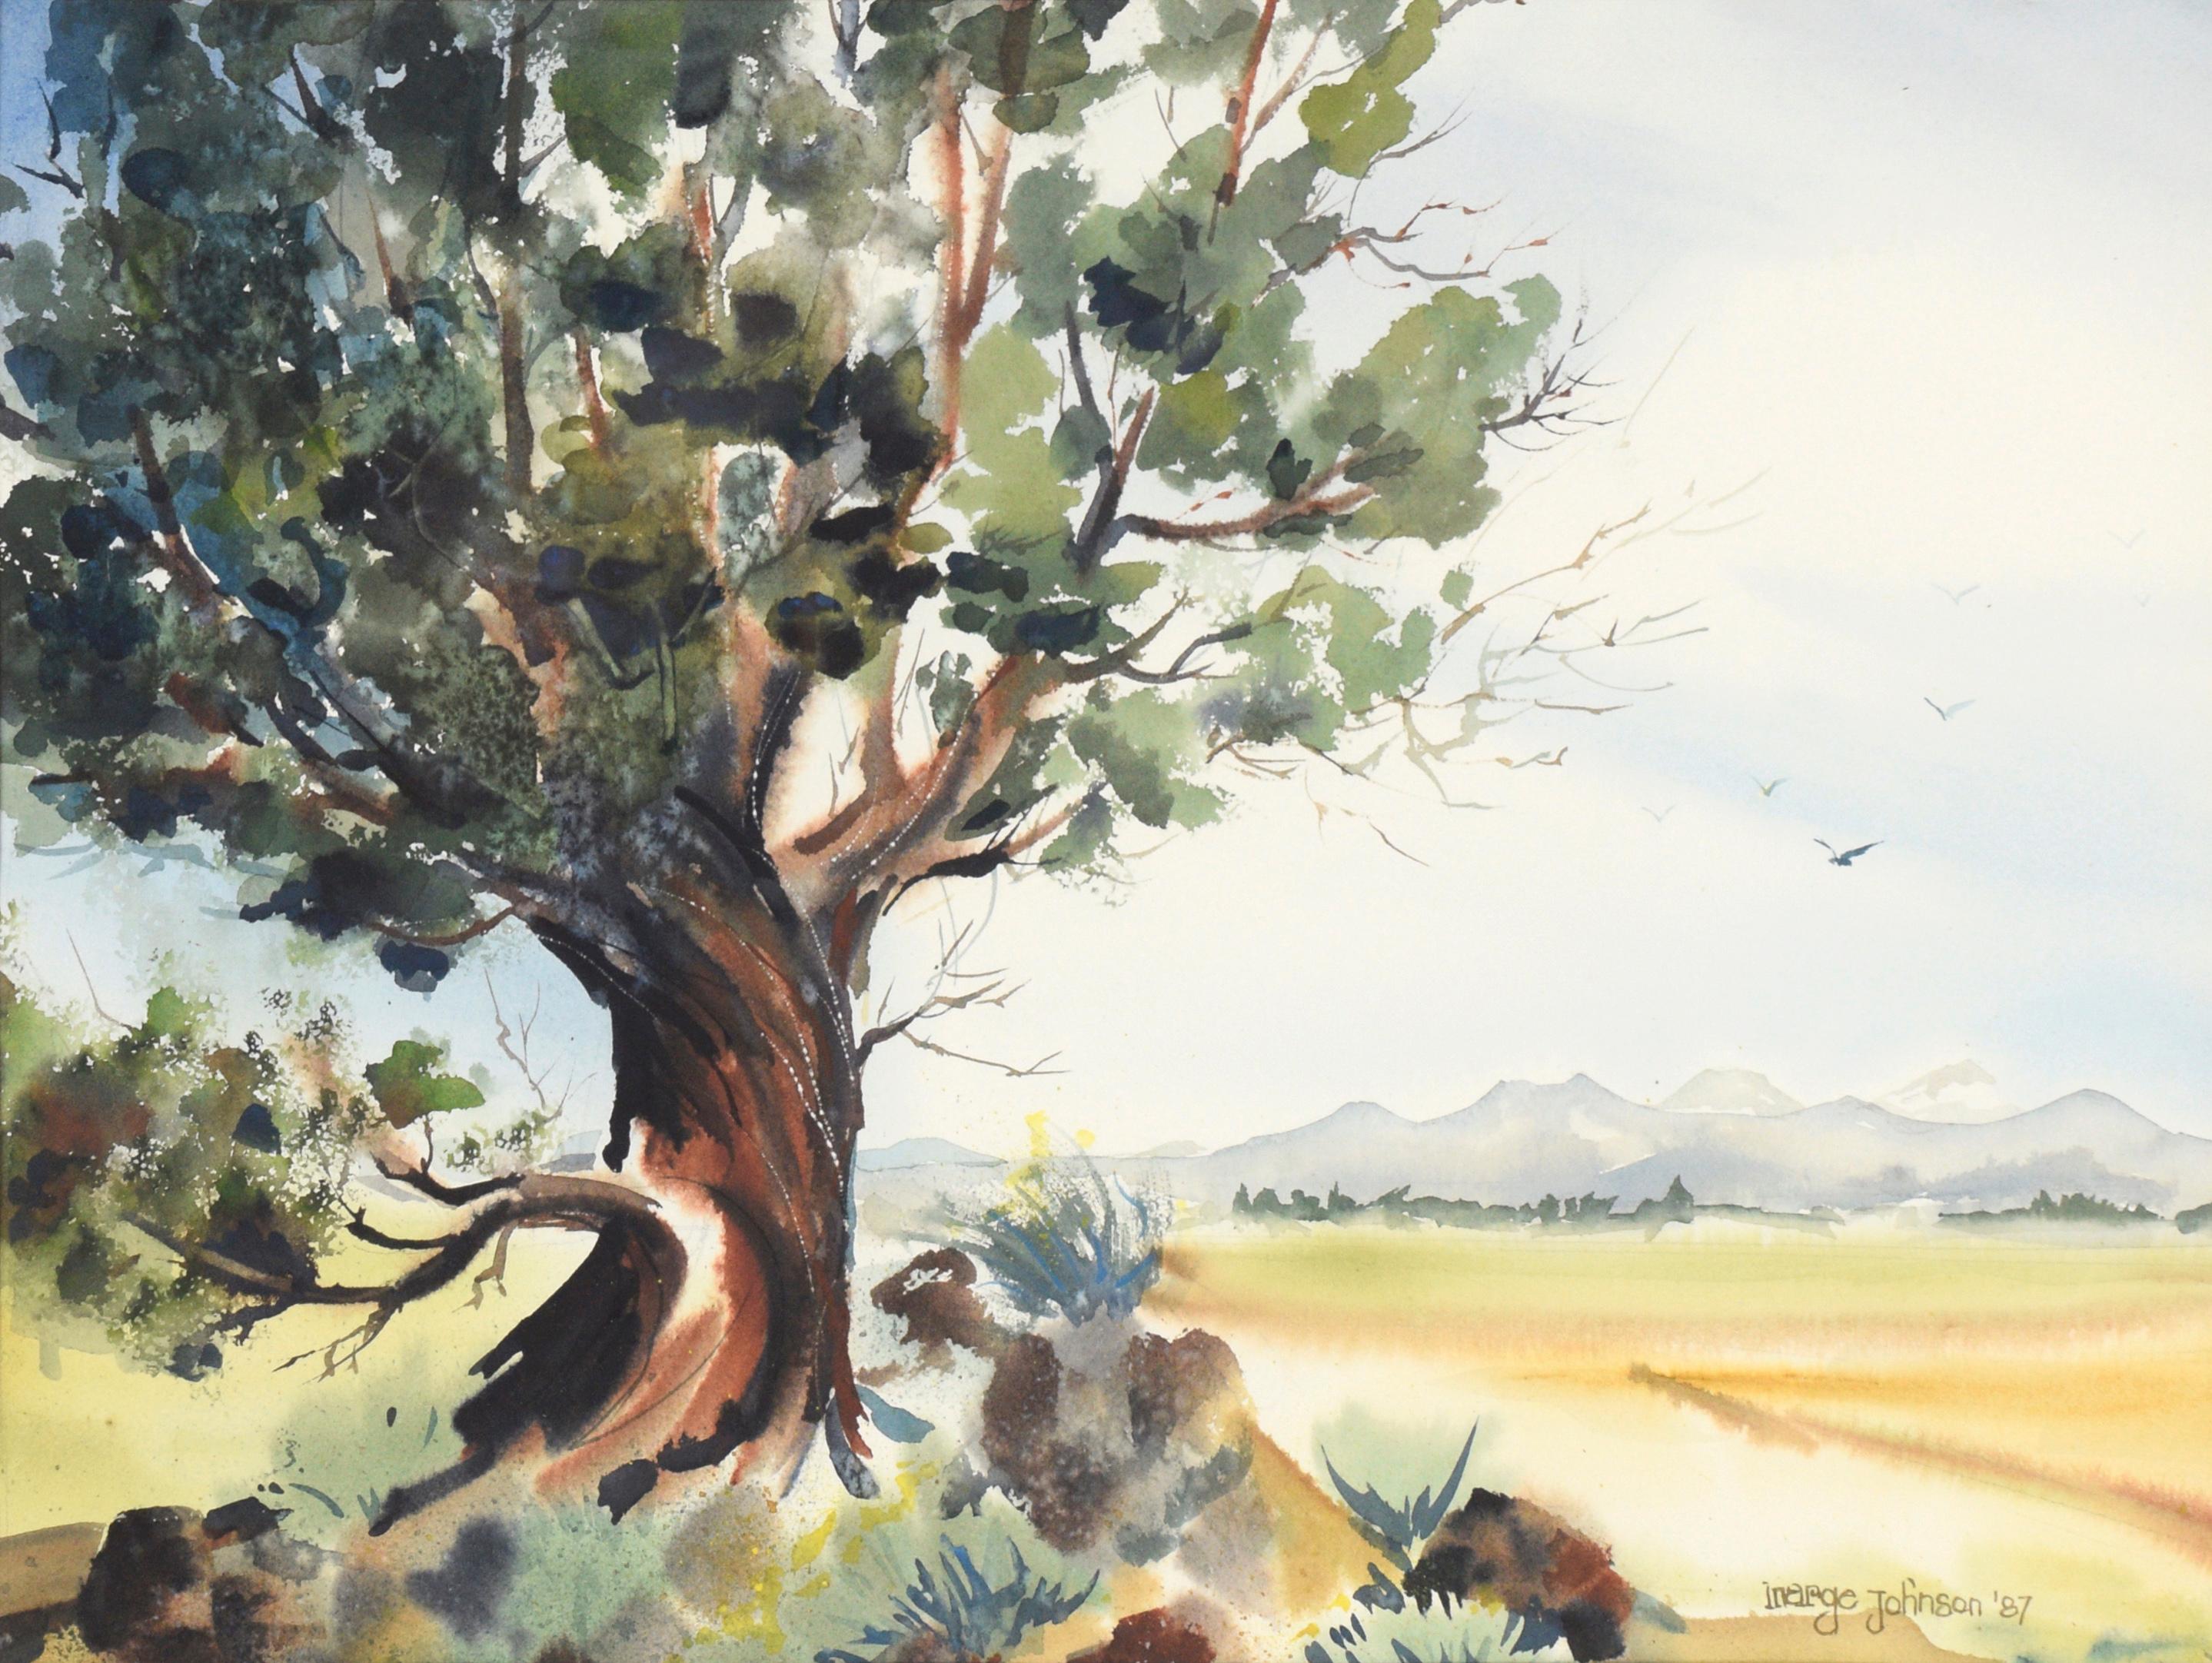 The Ancient Tree, Watercolor Lansdscape - Art by Marge Eaton Johnson